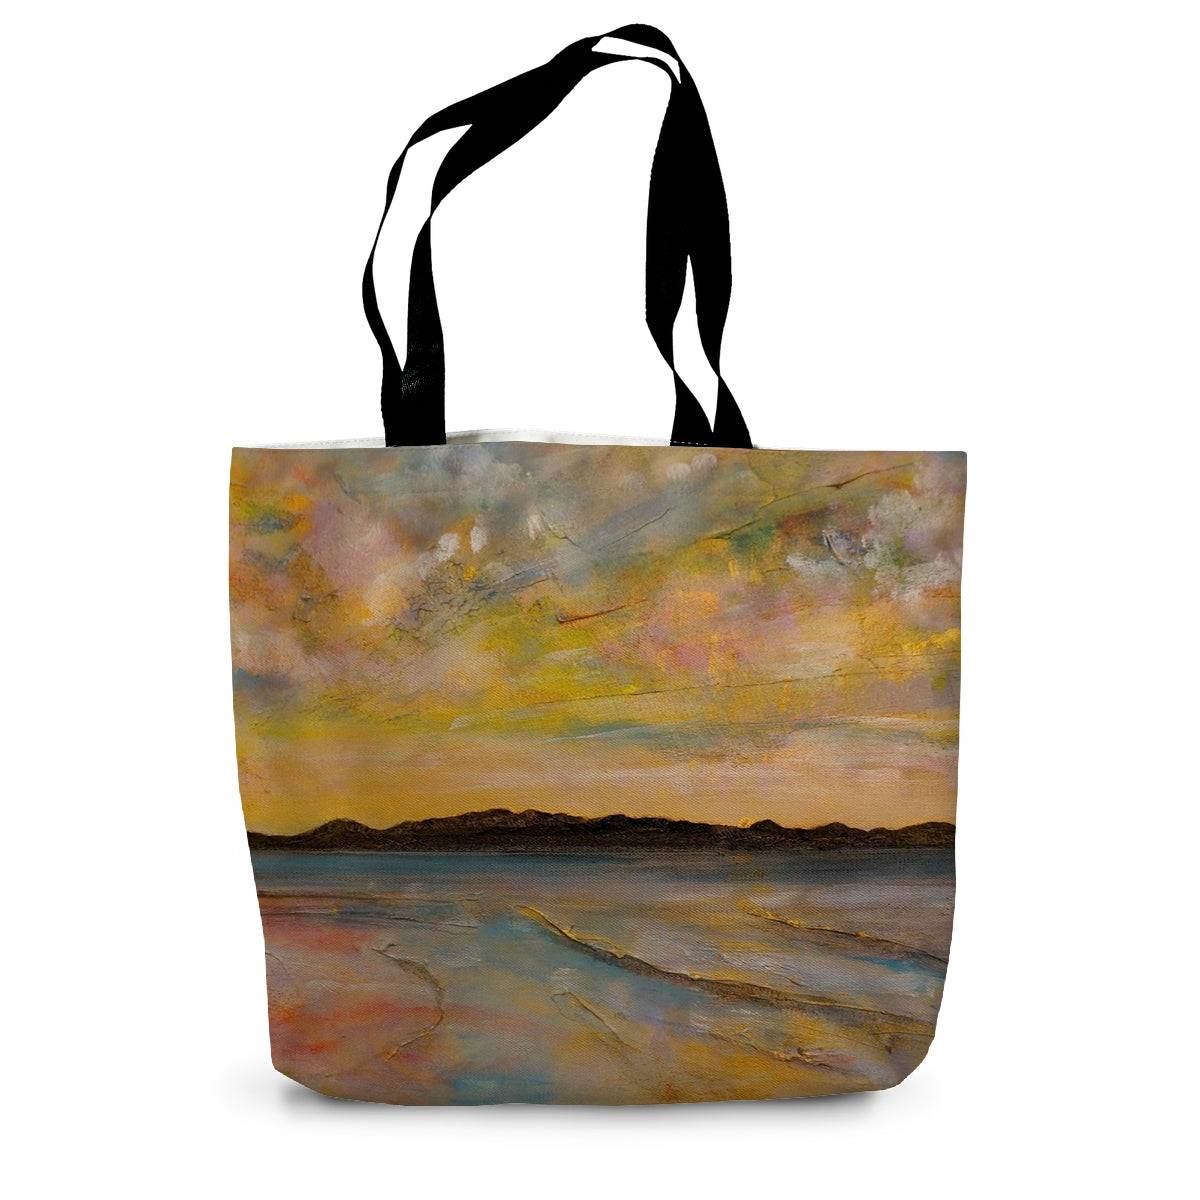 Vallay Island North Uist Art Gifts Canvas Tote Bag-Bags-Hebridean Islands Art Gallery-14"x18.5"-Paintings, Prints, Homeware, Art Gifts From Scotland By Scottish Artist Kevin Hunter